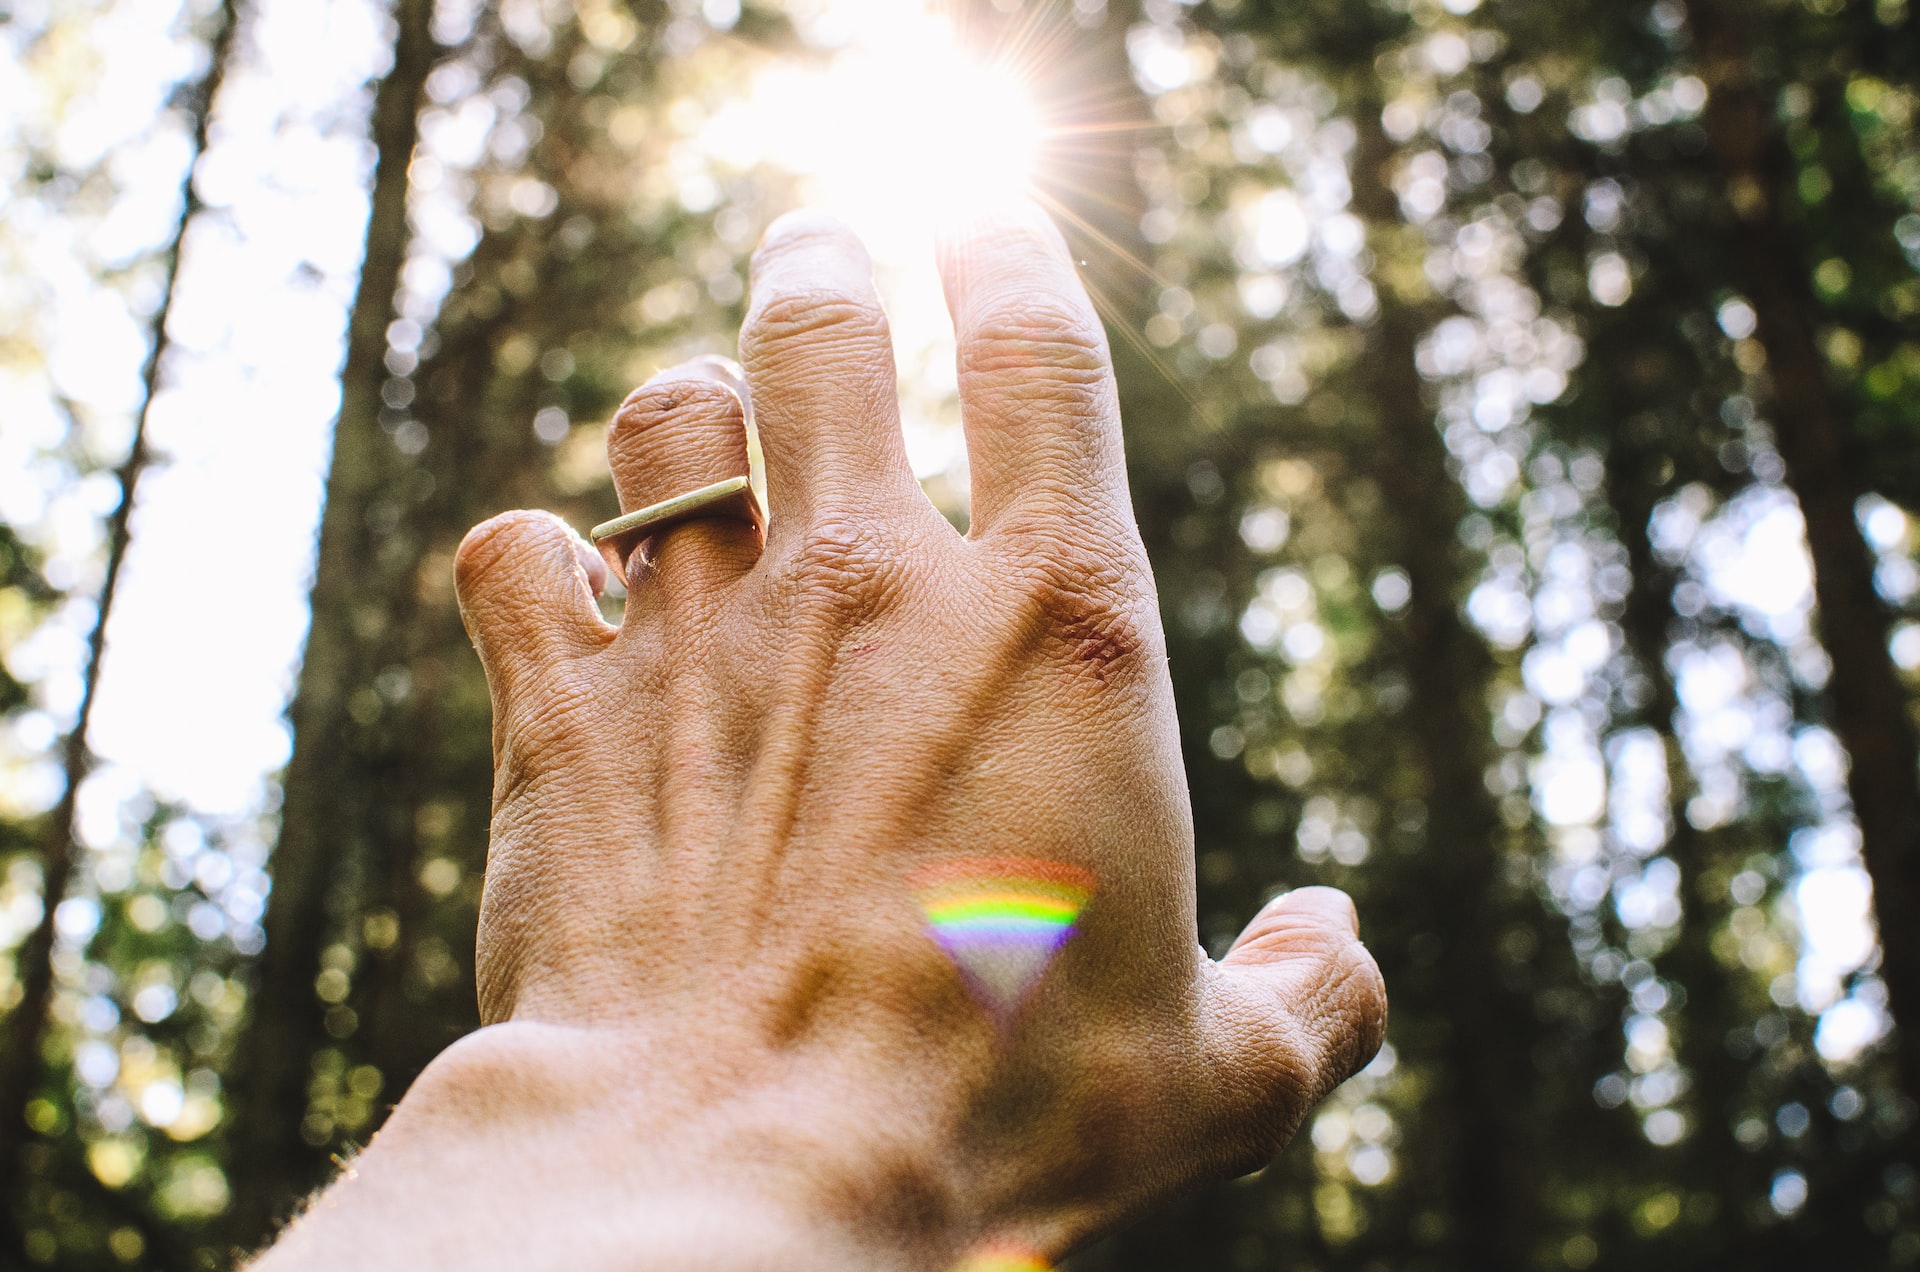 A human hand with a ring on it reaching up while sunlight passes through big trees